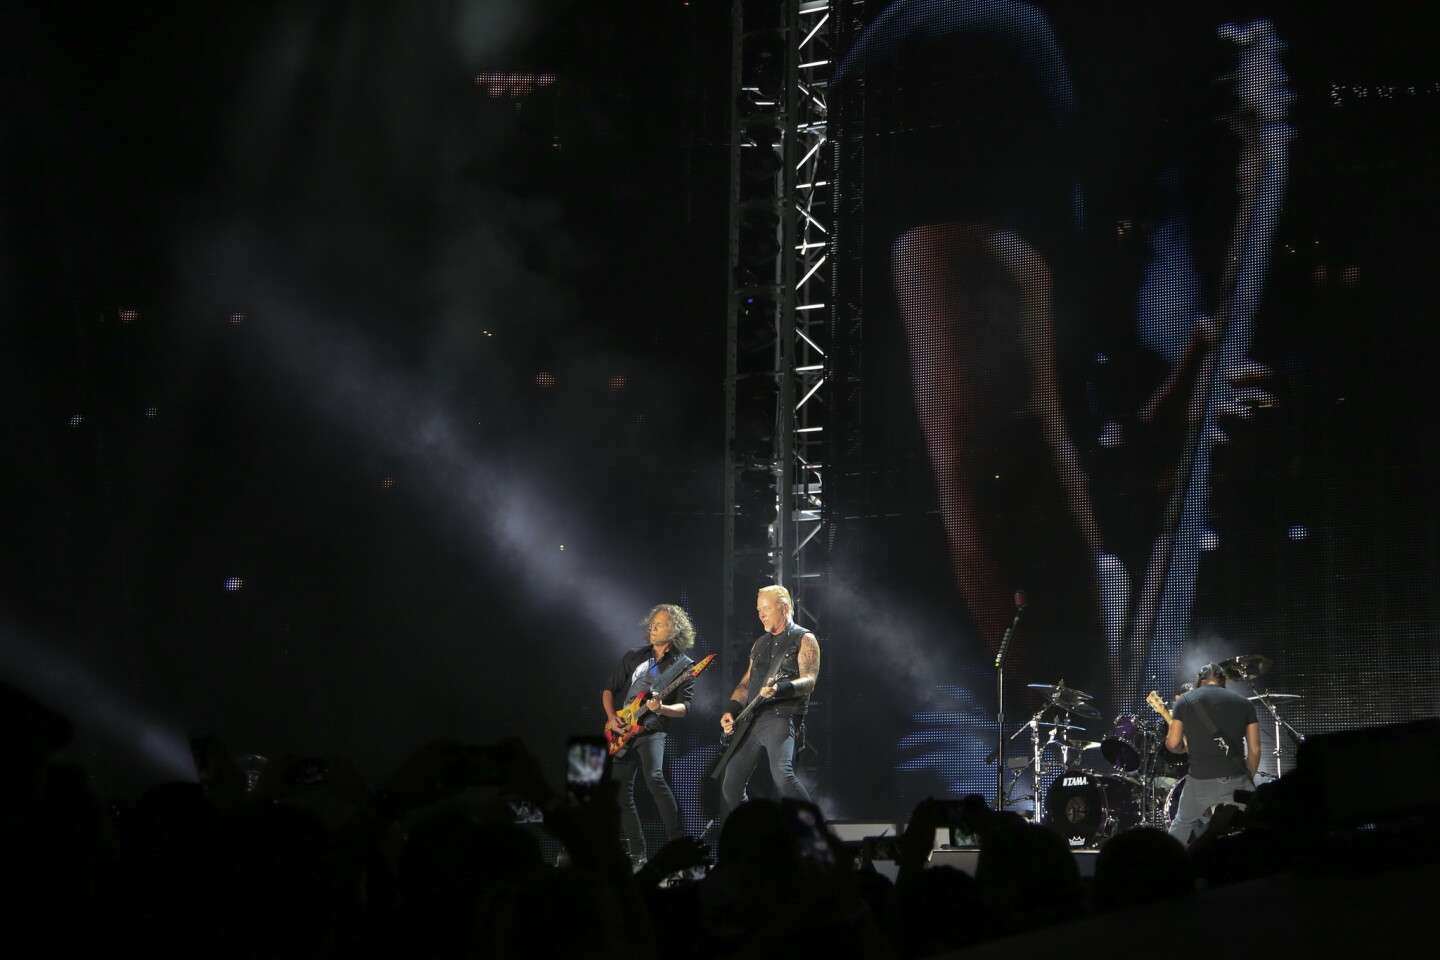 Lead singer/guitarist, James Hetfield and lead guitarist, Kirk Hammett played the bands first set as they opened Sunday night at Petco Park.